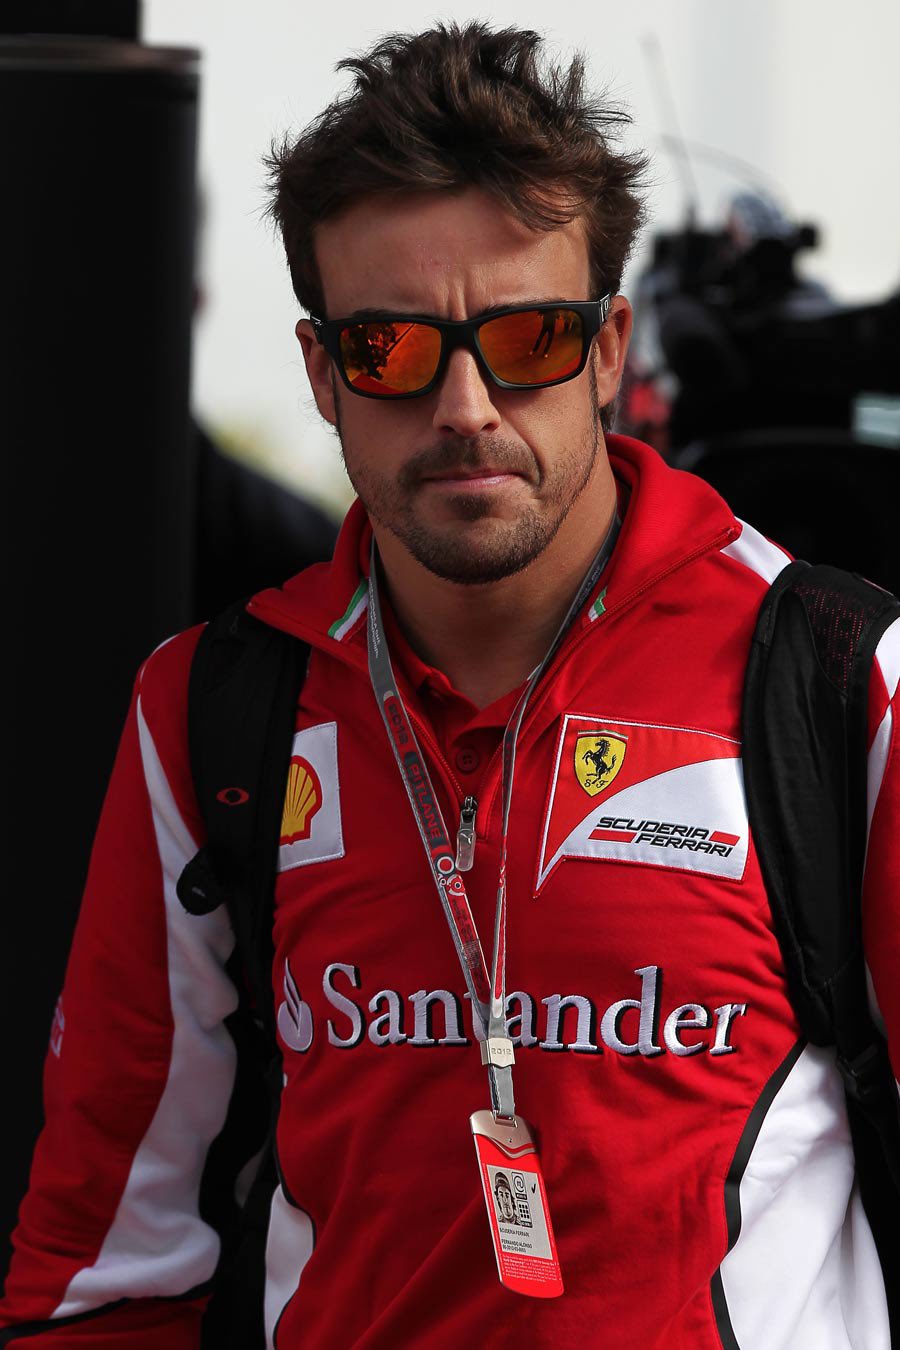 sollys hjælper sensor Aston Martin F1 updates on X: "Fernando Alonso became brand ambassador of  Oakley in the middle of 2011 and was wearing the Garage Rock sunglasses  model until he switched to Kimoa Now